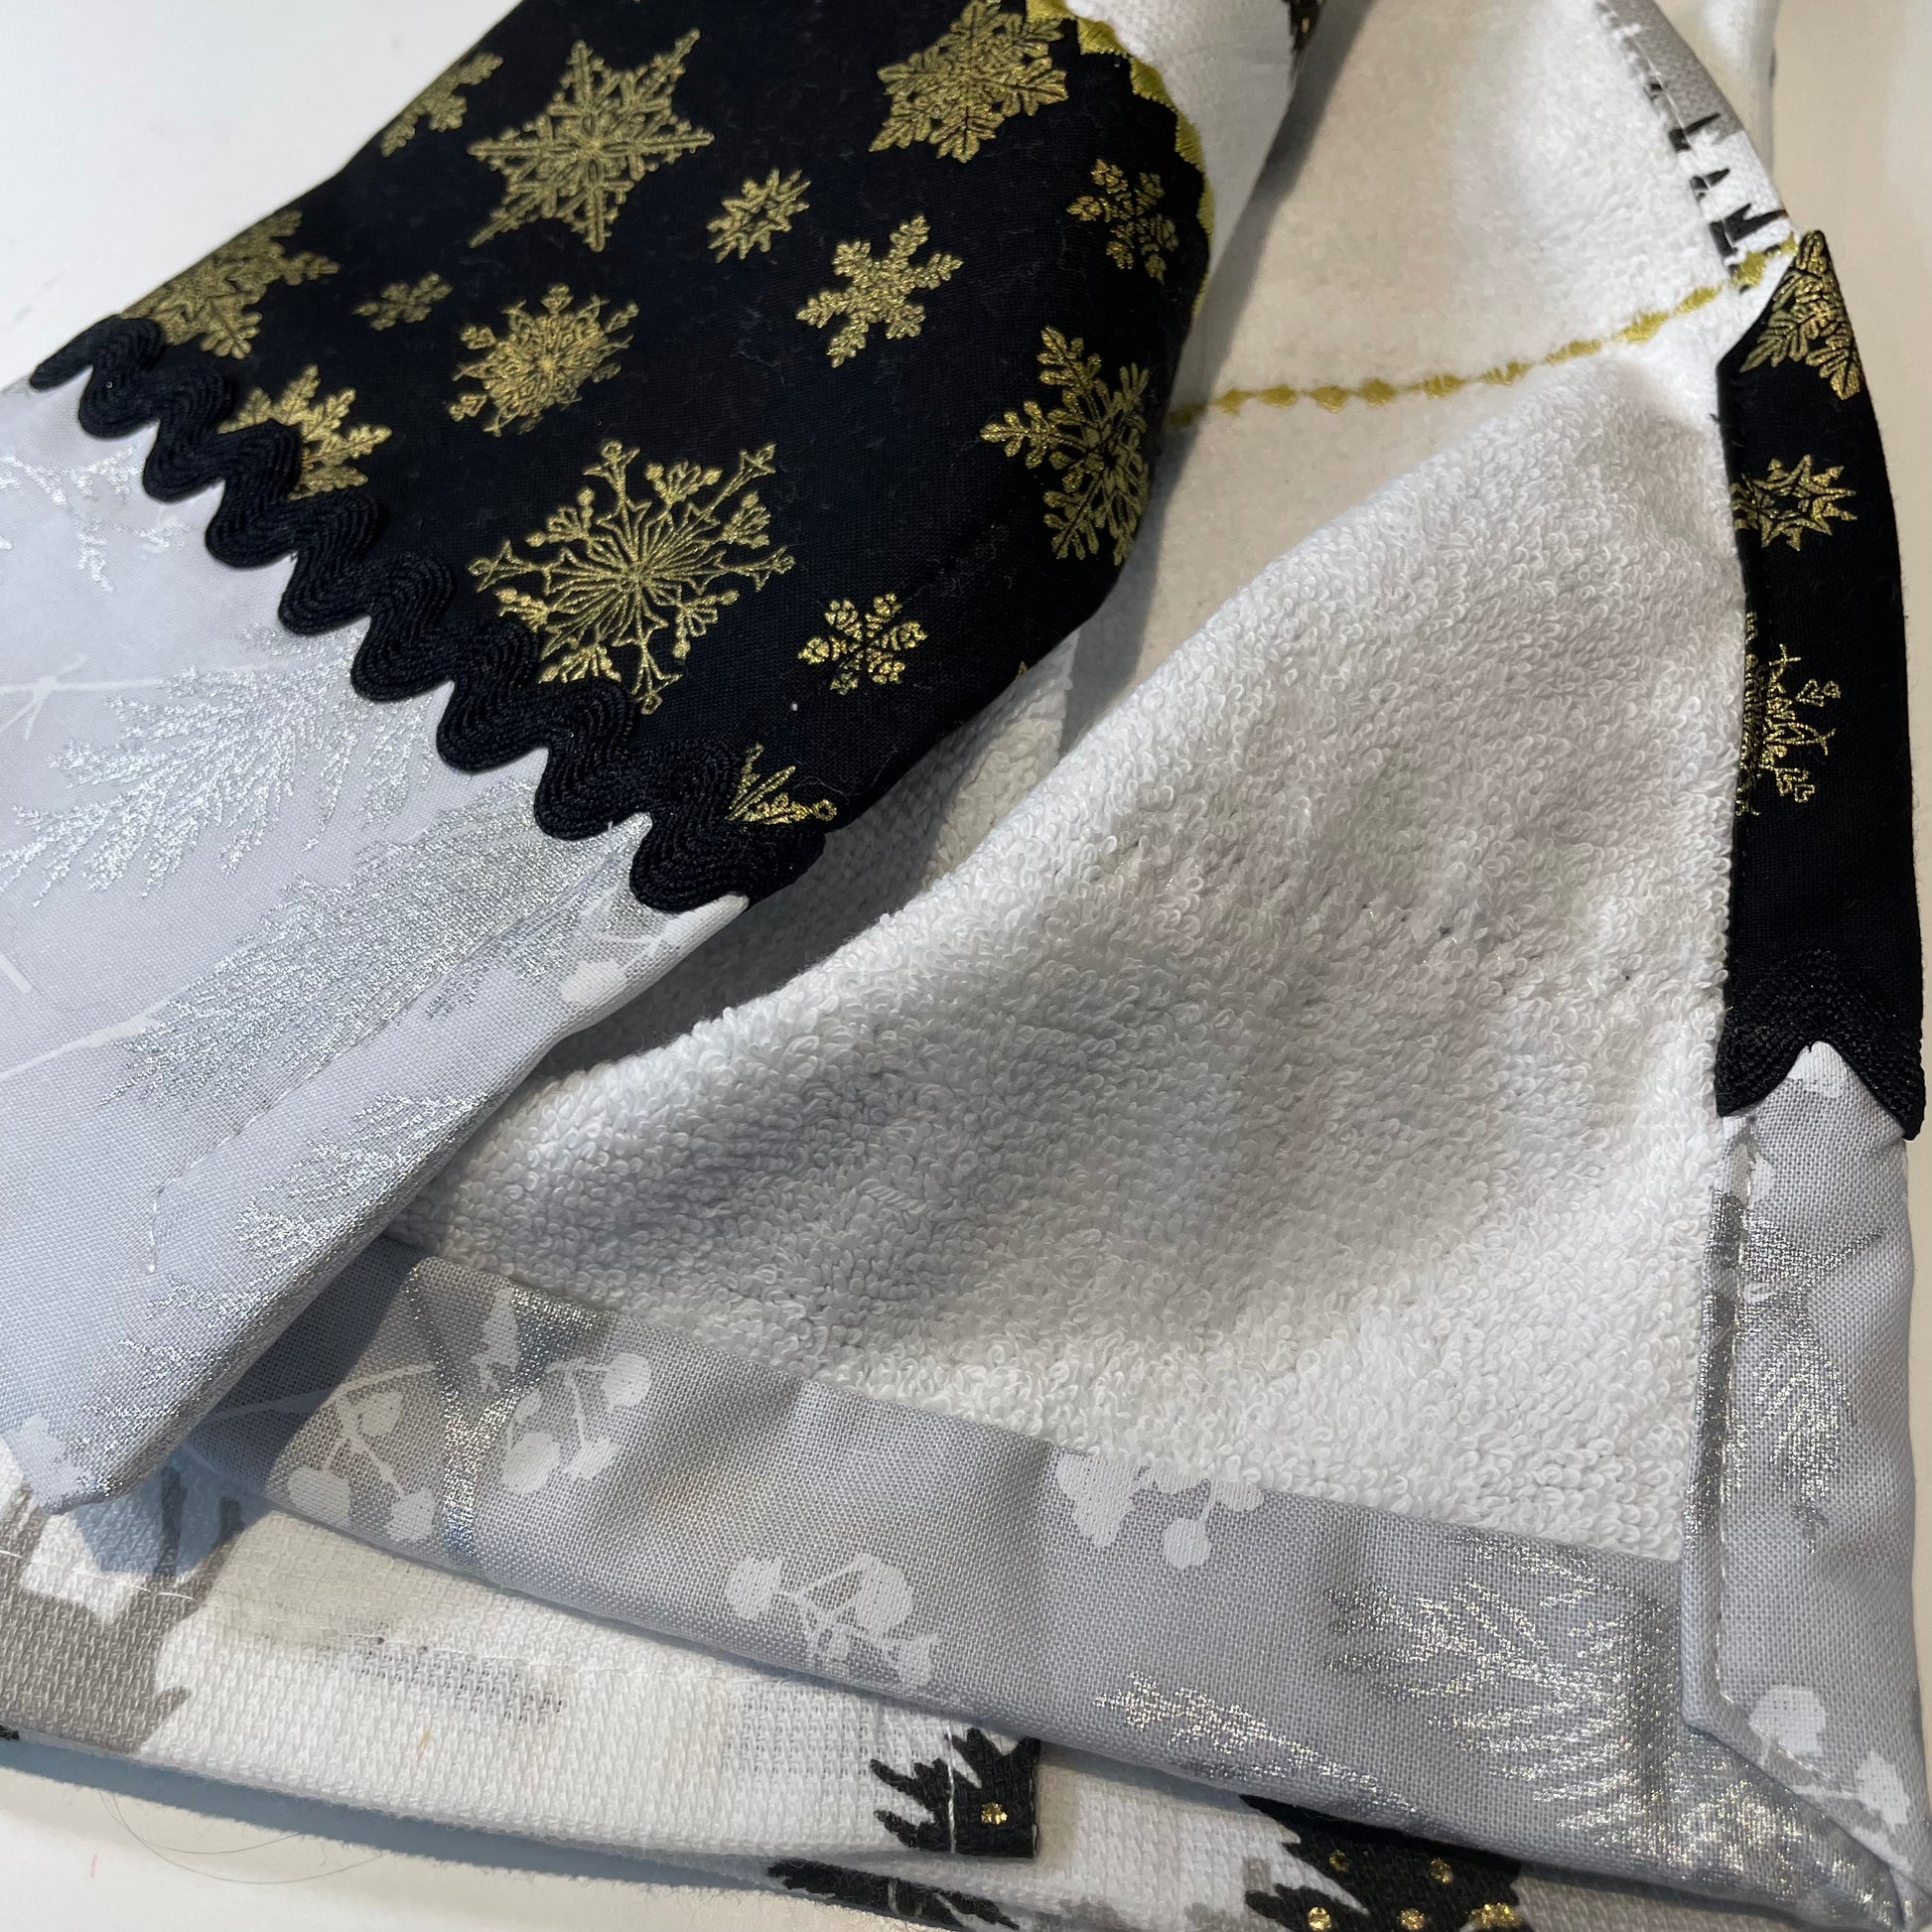 Black and Gold Christmas Dish Towel Featuring Reindeer, Christmas Trees and Snowflakes. Part of a mix and match collection of decor. Shop the look at Home Stitchery Decor and be sure to pop over to the Home Stitchery Decor YouTube Channel